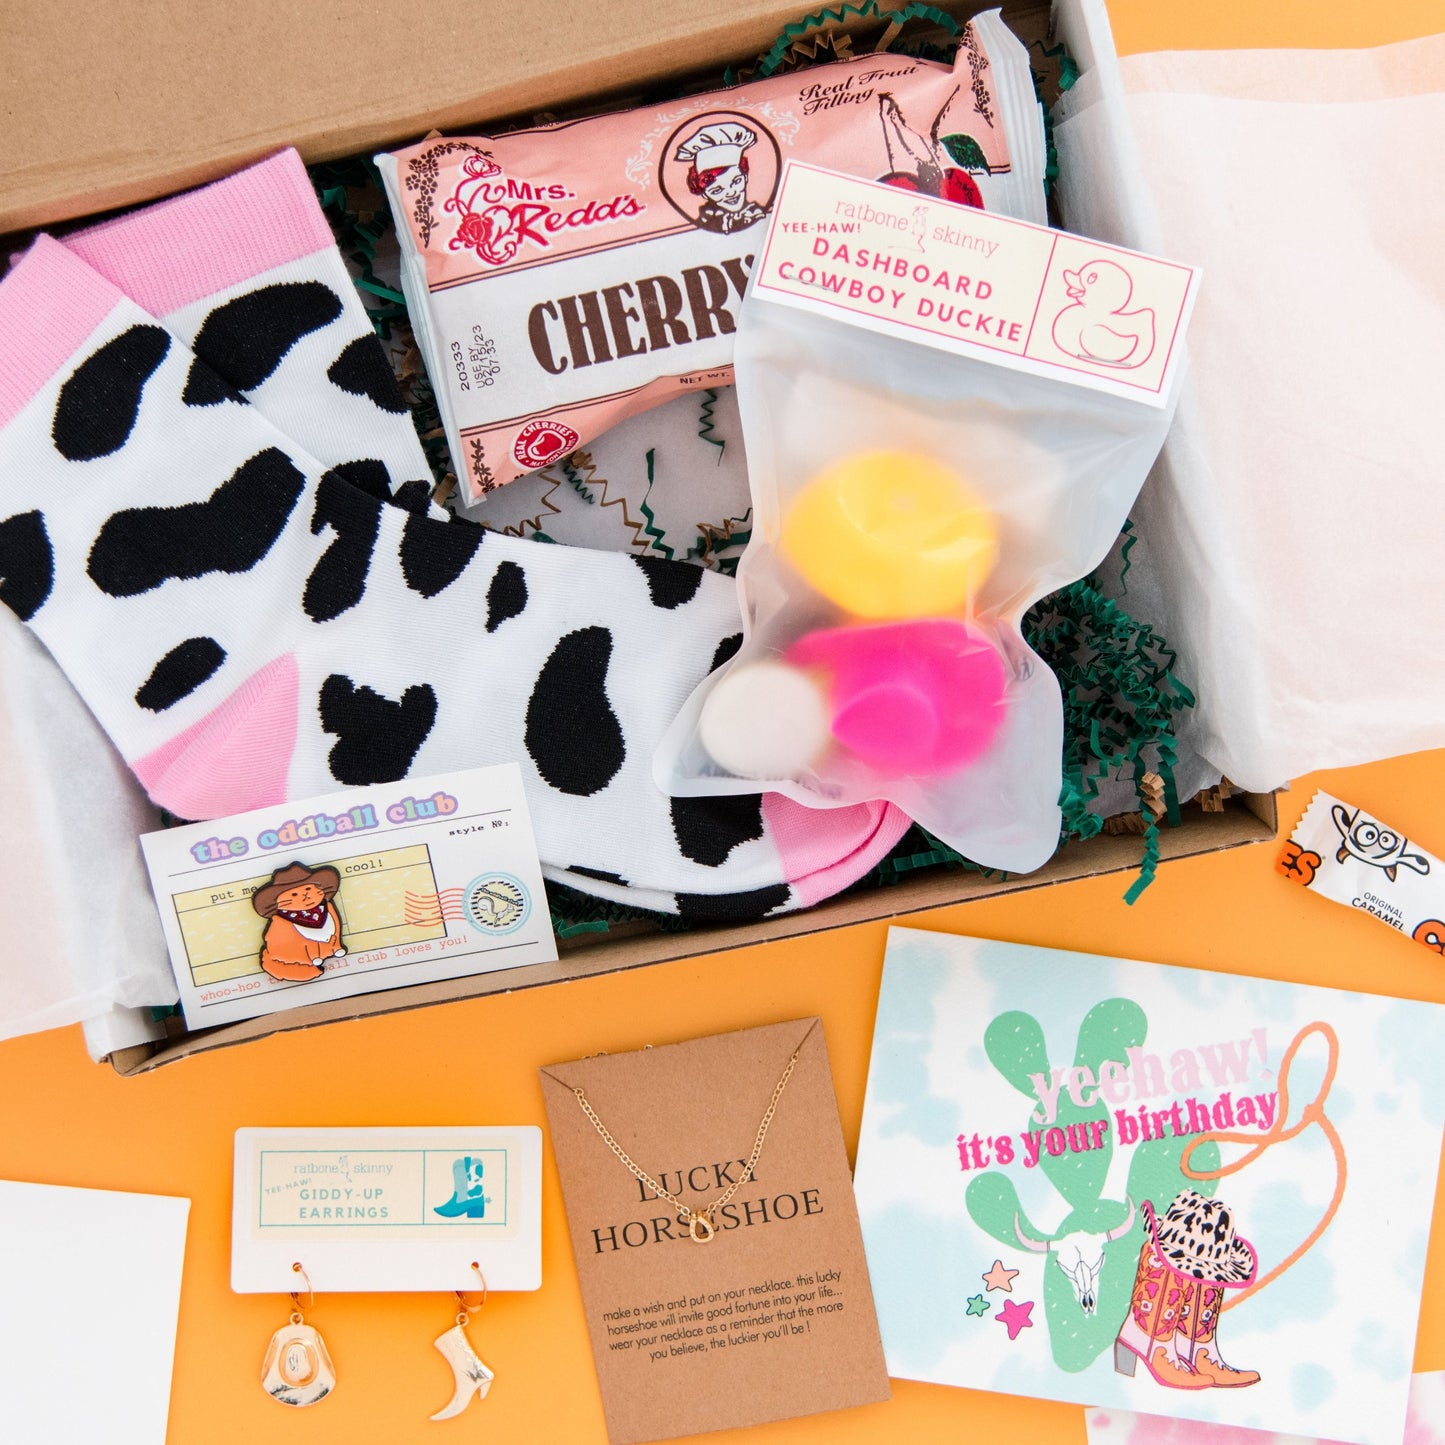 Shop our cowboy-themed subscription box and get your hands on a range of Western-inspired items, including a cute dashboard duckie, Yeehaw greeting card, cowgirl hat earrings, lucky horseshoe necklace, and a cat with bandana and cowboy hat enamel pin. Get your country chic fix with our Western box!